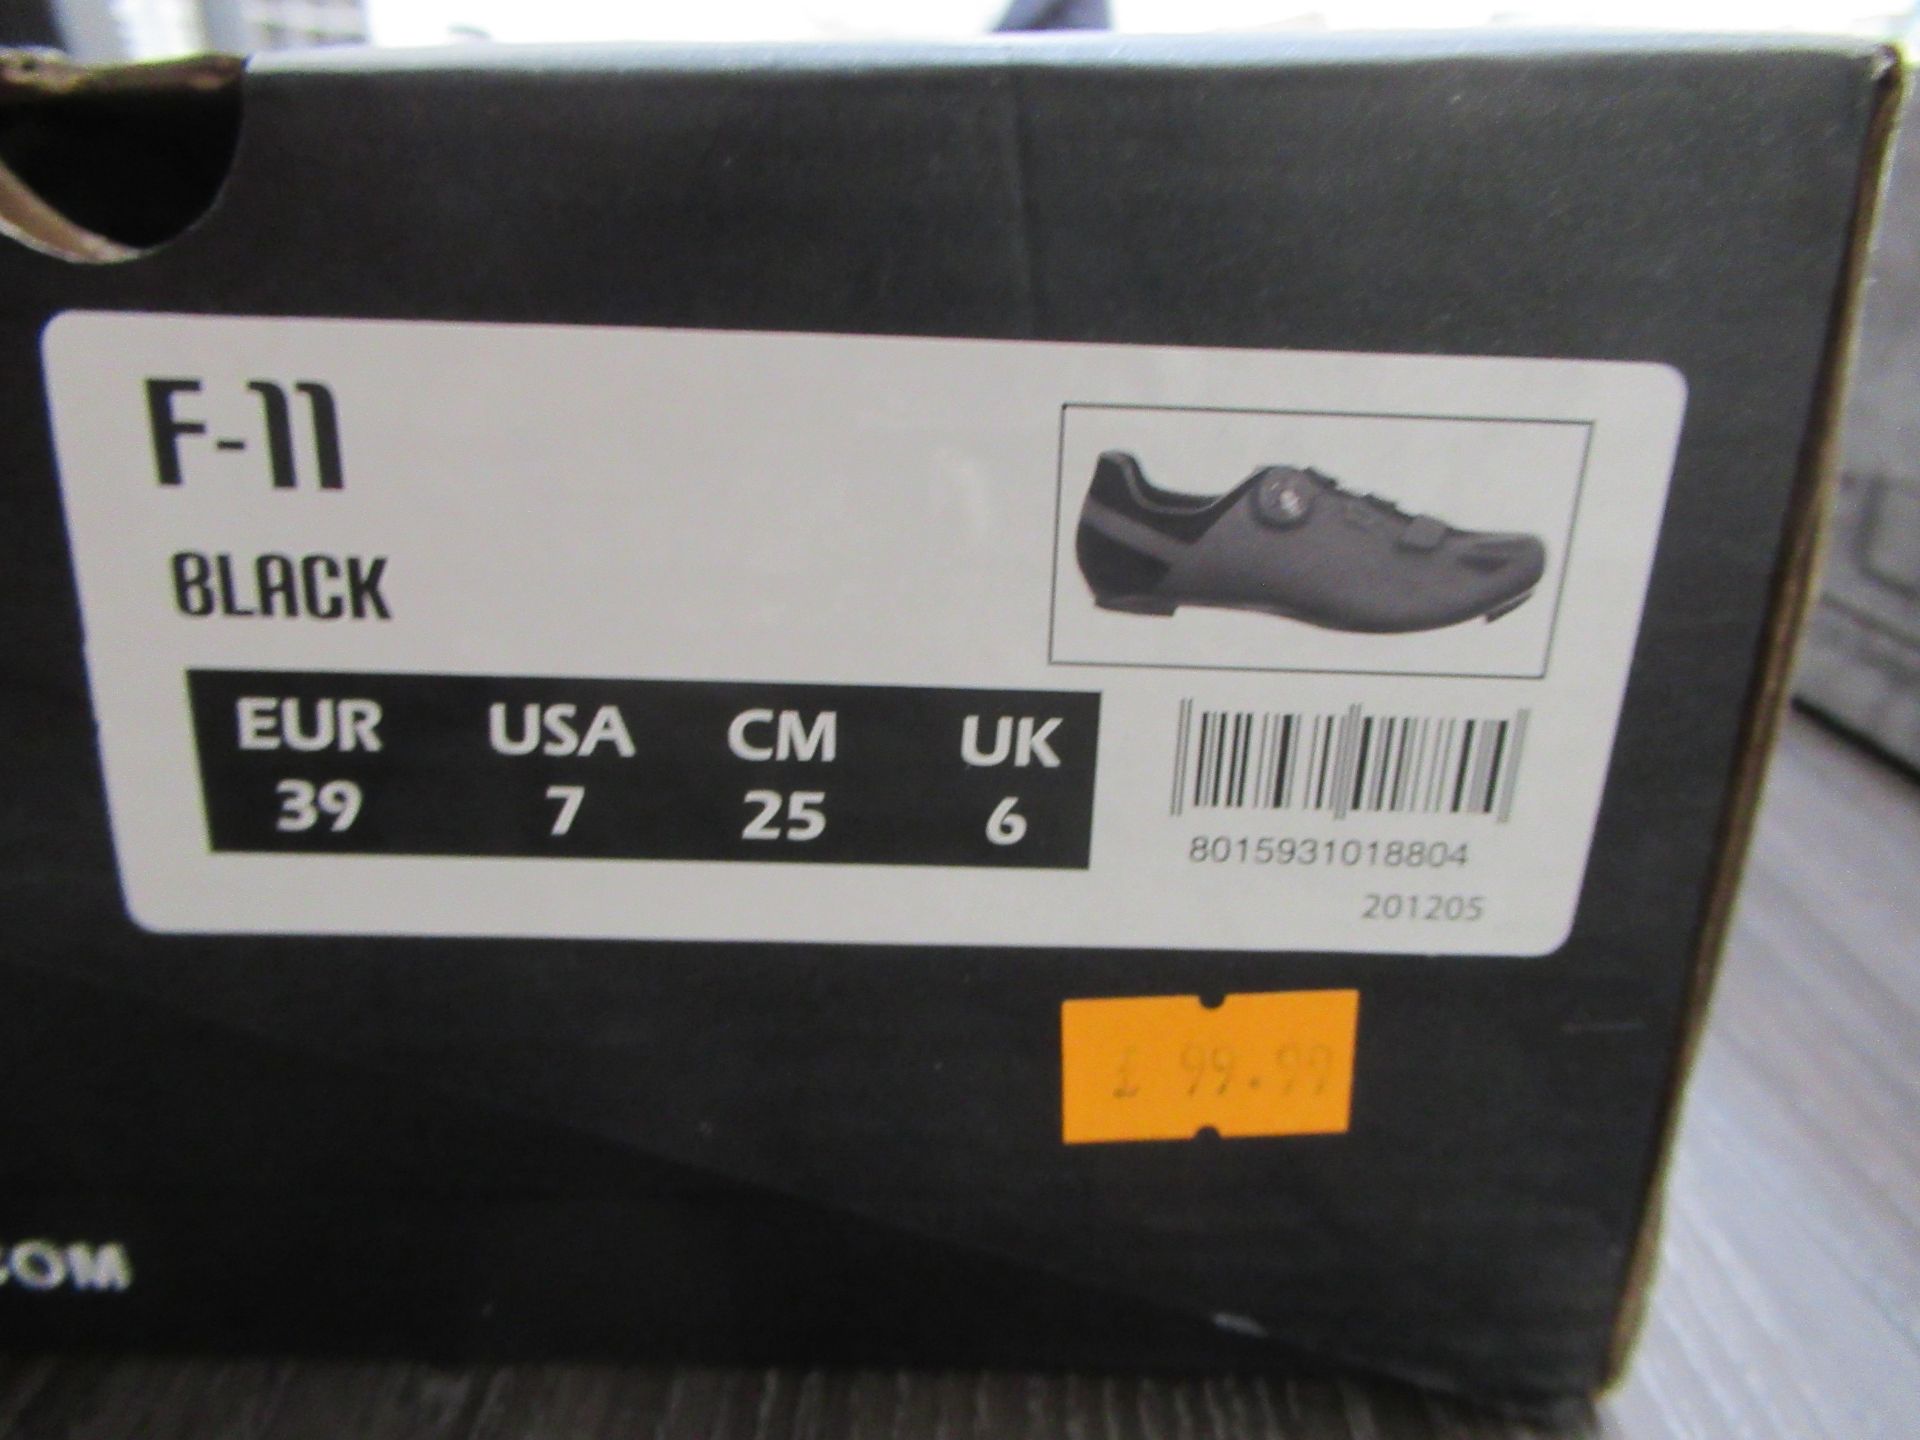 2 x Pairs of FLR cycling shoes - 1 x F-11 boxed EU size 39 (RRP£99.99) and 1 x F-35 III boxed EU siz - Image 5 of 7